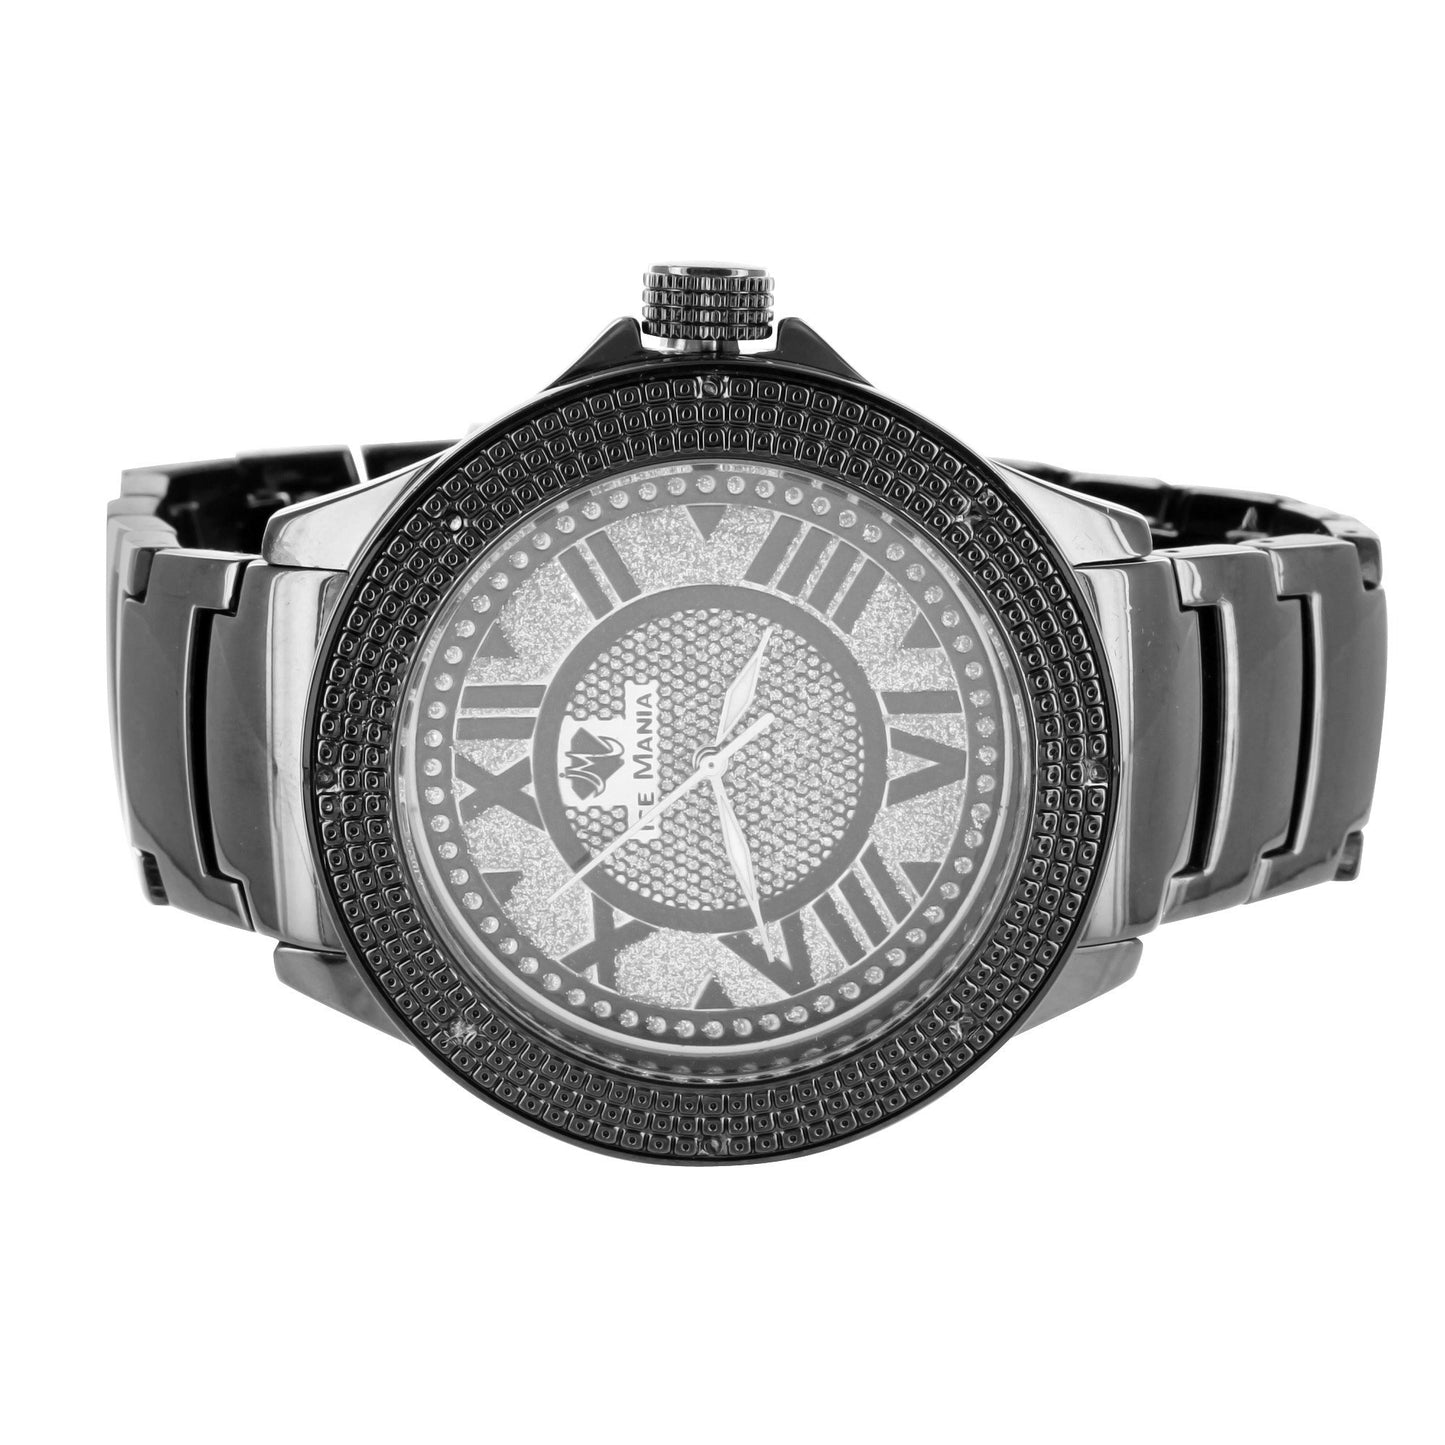 Roman Numeral Dial Classy Ice Mania Joe Rodeo Jojino Stainless Steel Back Watch